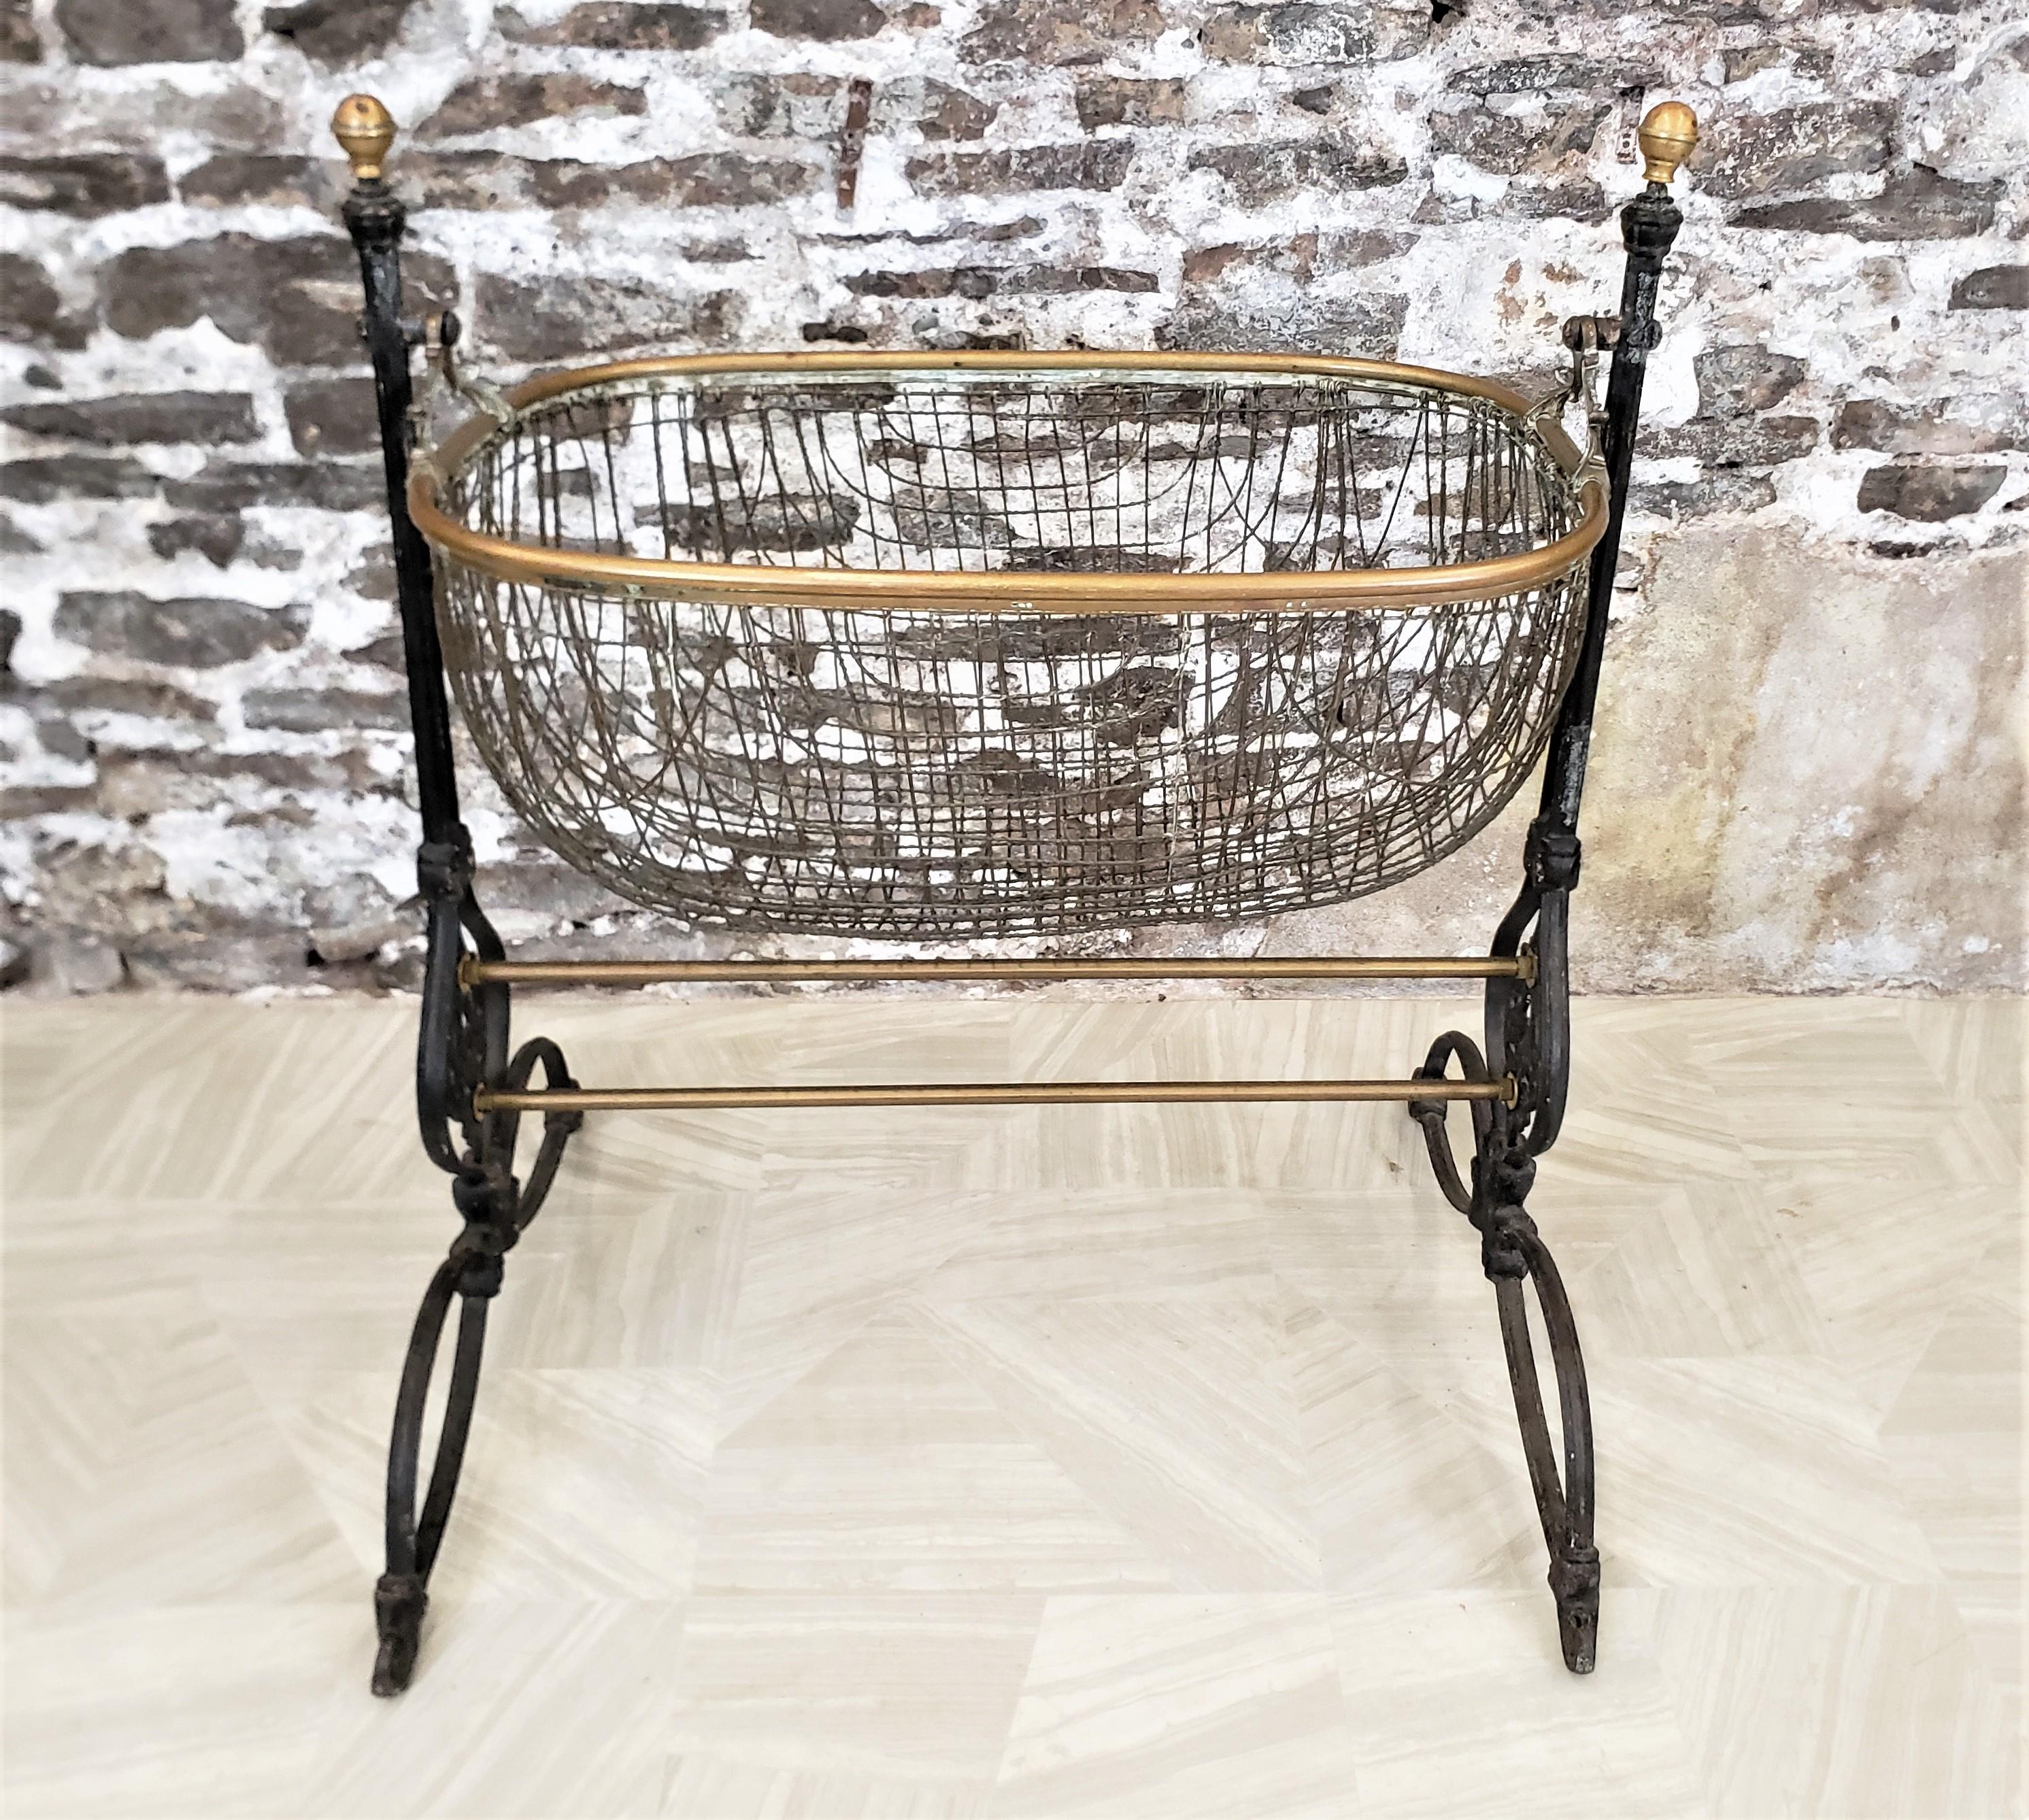 This antique baby cradle is unsigned, but presumed to have originated from England and date to approximately 1880 and done in the period Victorian style. The frame or stand for the cradle is composed of cast iron with brass accents on the finials